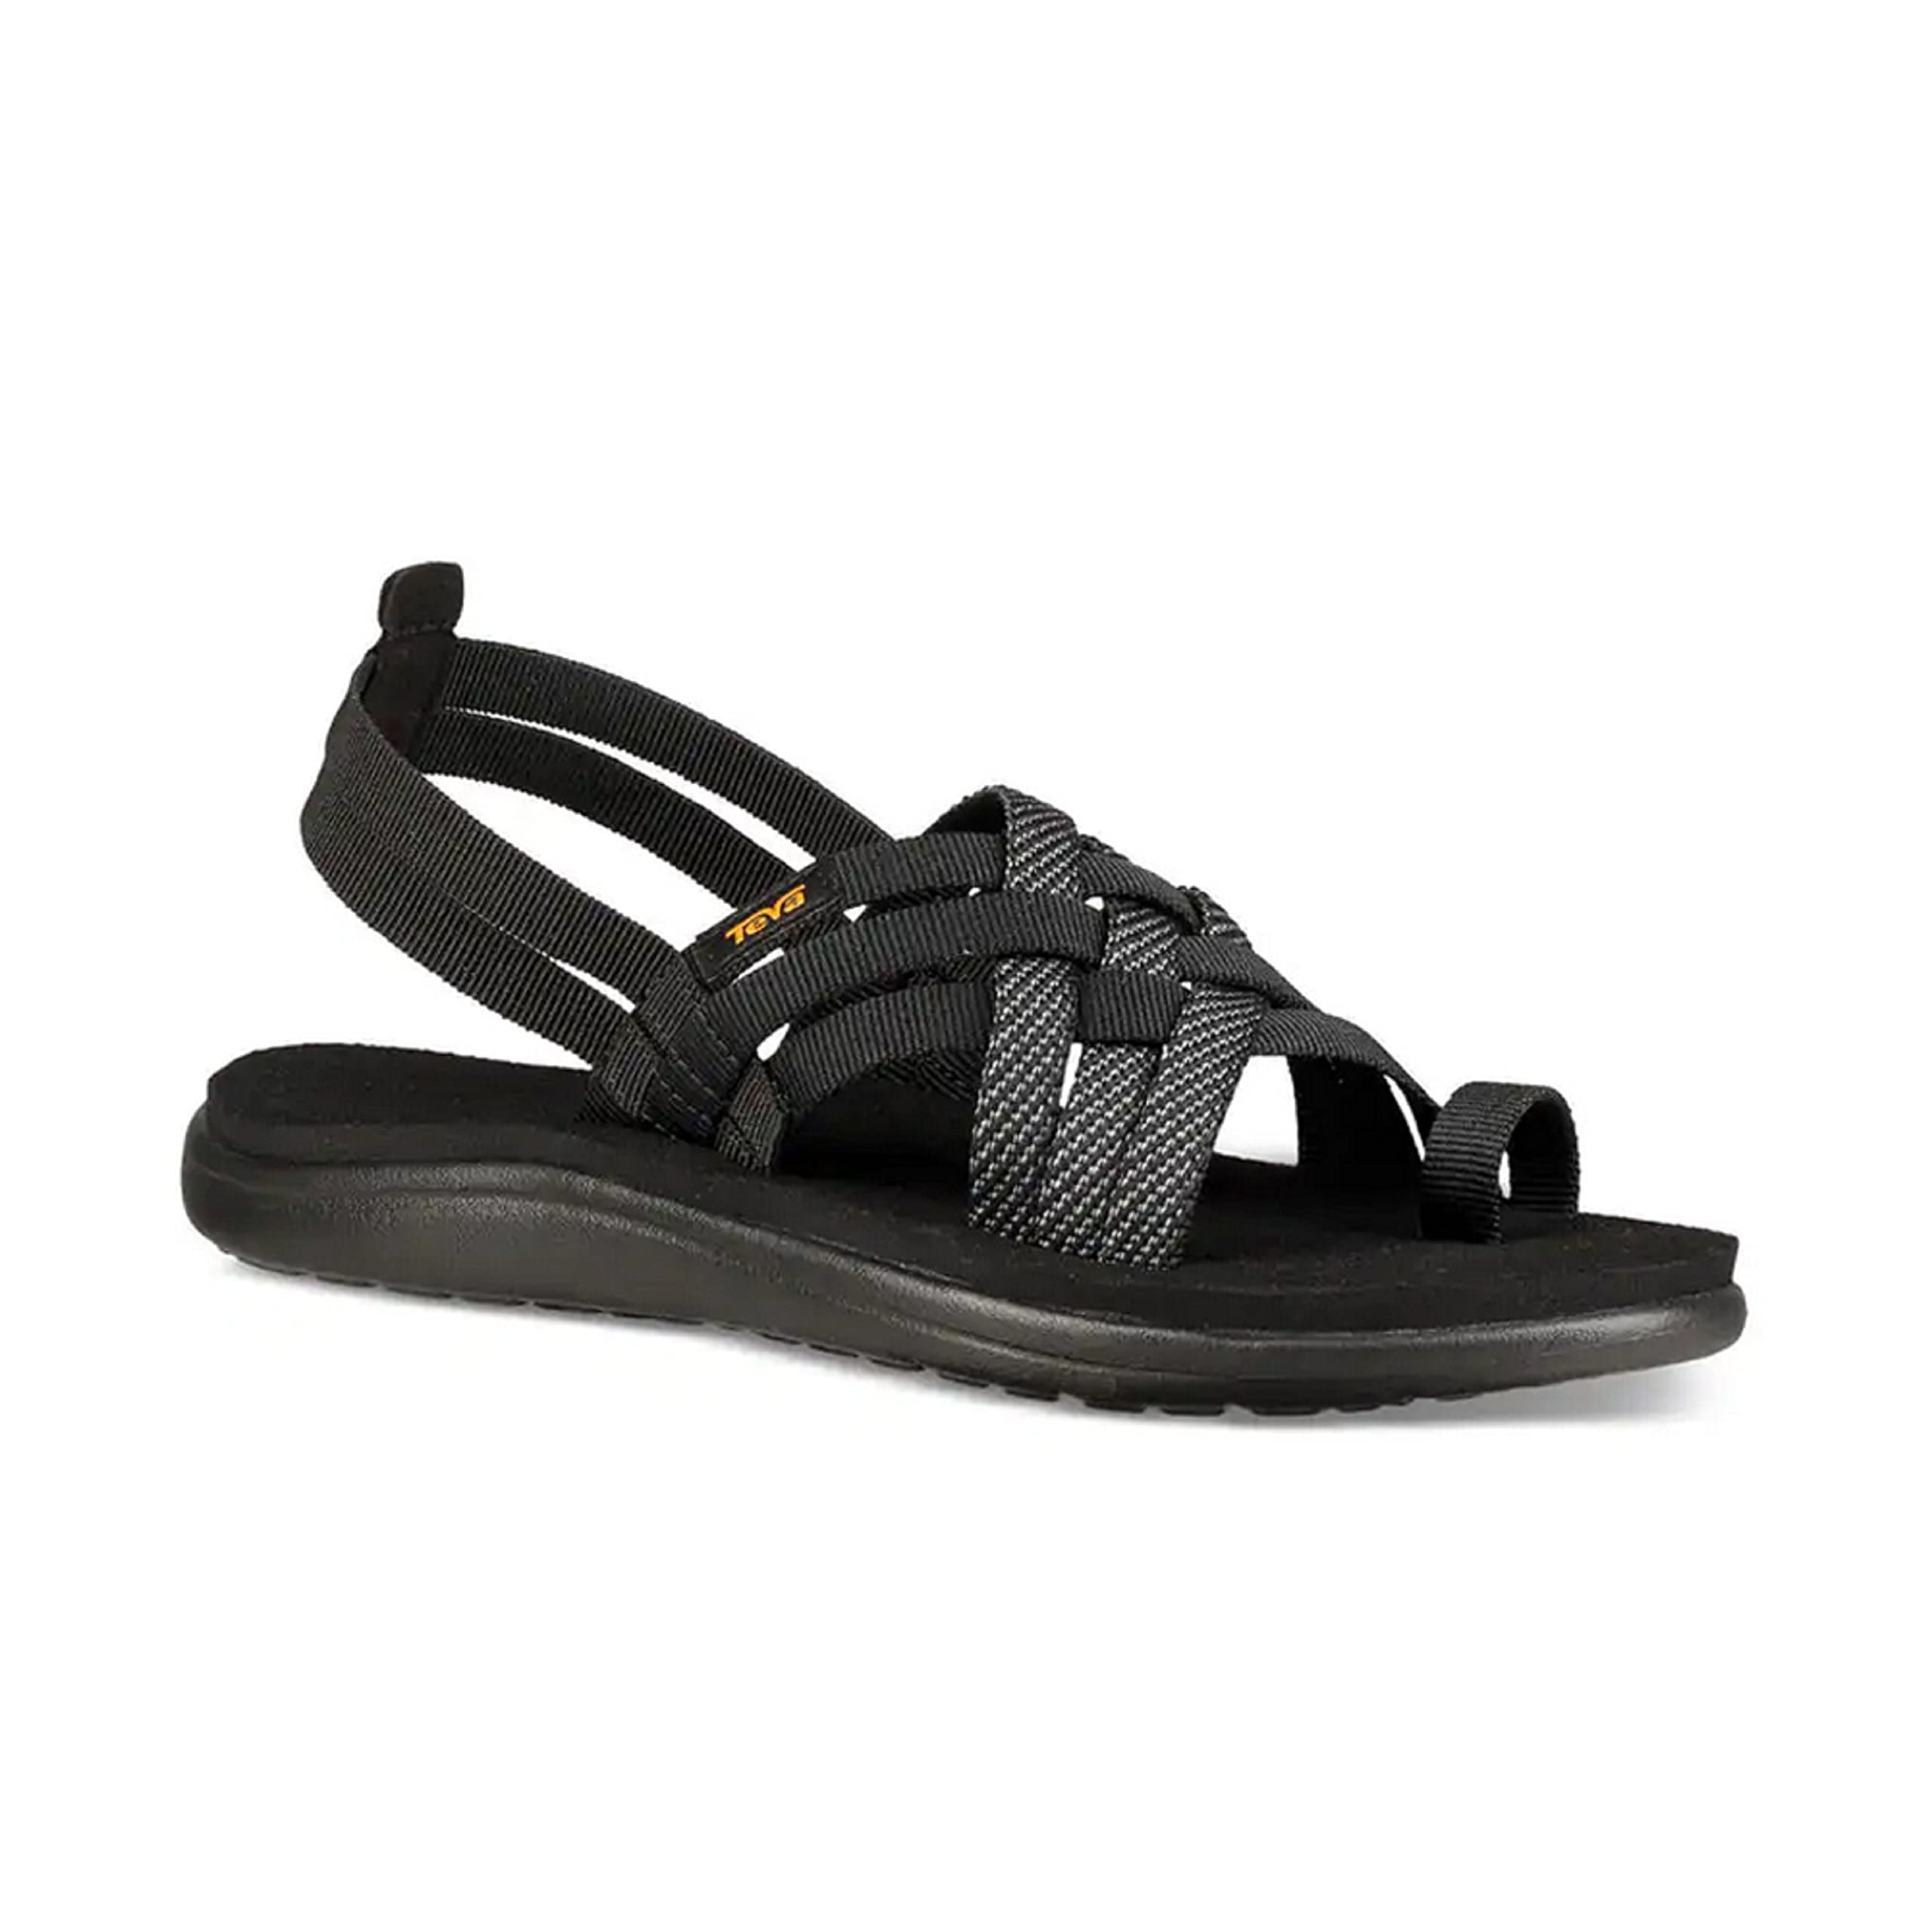 TEVA Women's Voya Strappy Lightweight Comfortable Quick-Drying Casual Sport Sandal